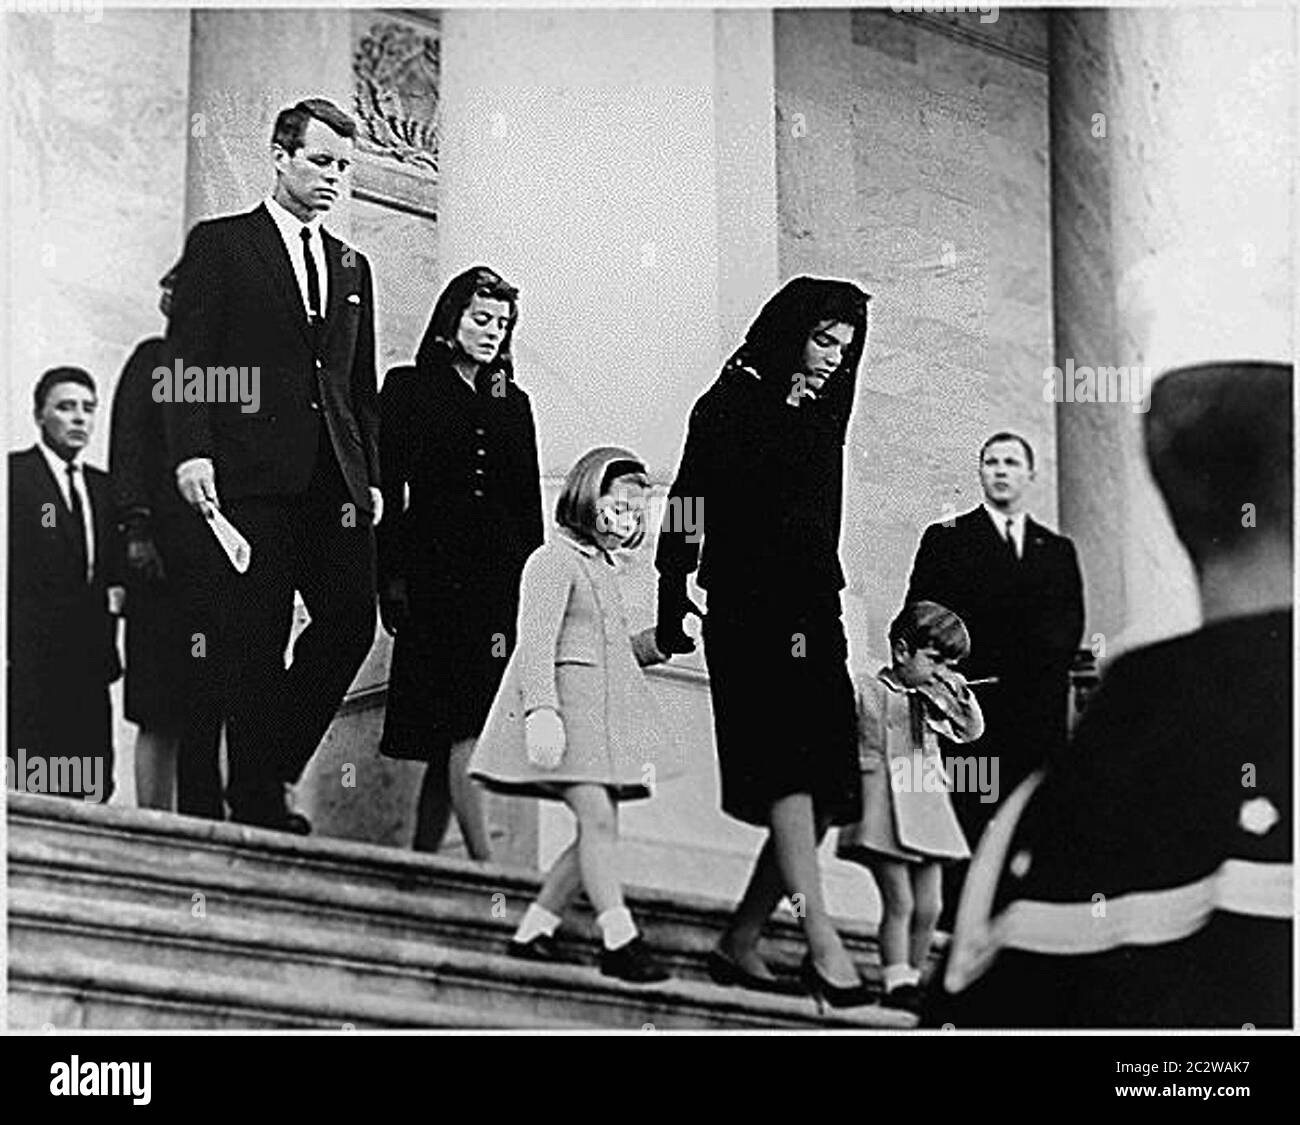 ***FILE PHOTO*** Jean Kennedy Smith Has Passed Away at 92. United States President John F. Kennedy's Family leaves the U.S. Capitol after Ceremony on November 24, 1963. (L-R)Caroline Kennedy, Jacqueline Bouvier Kennedy, John F. Kennedy, Jr. (2nd row) Attorney General Robert F. Kennedy, Patricia Kennedy Lawford (hidden) Jean Kennedy Smith (3rd Row) Peter Lawford. Credit: JFK Library via CNP /MediaPunch Stock Photo